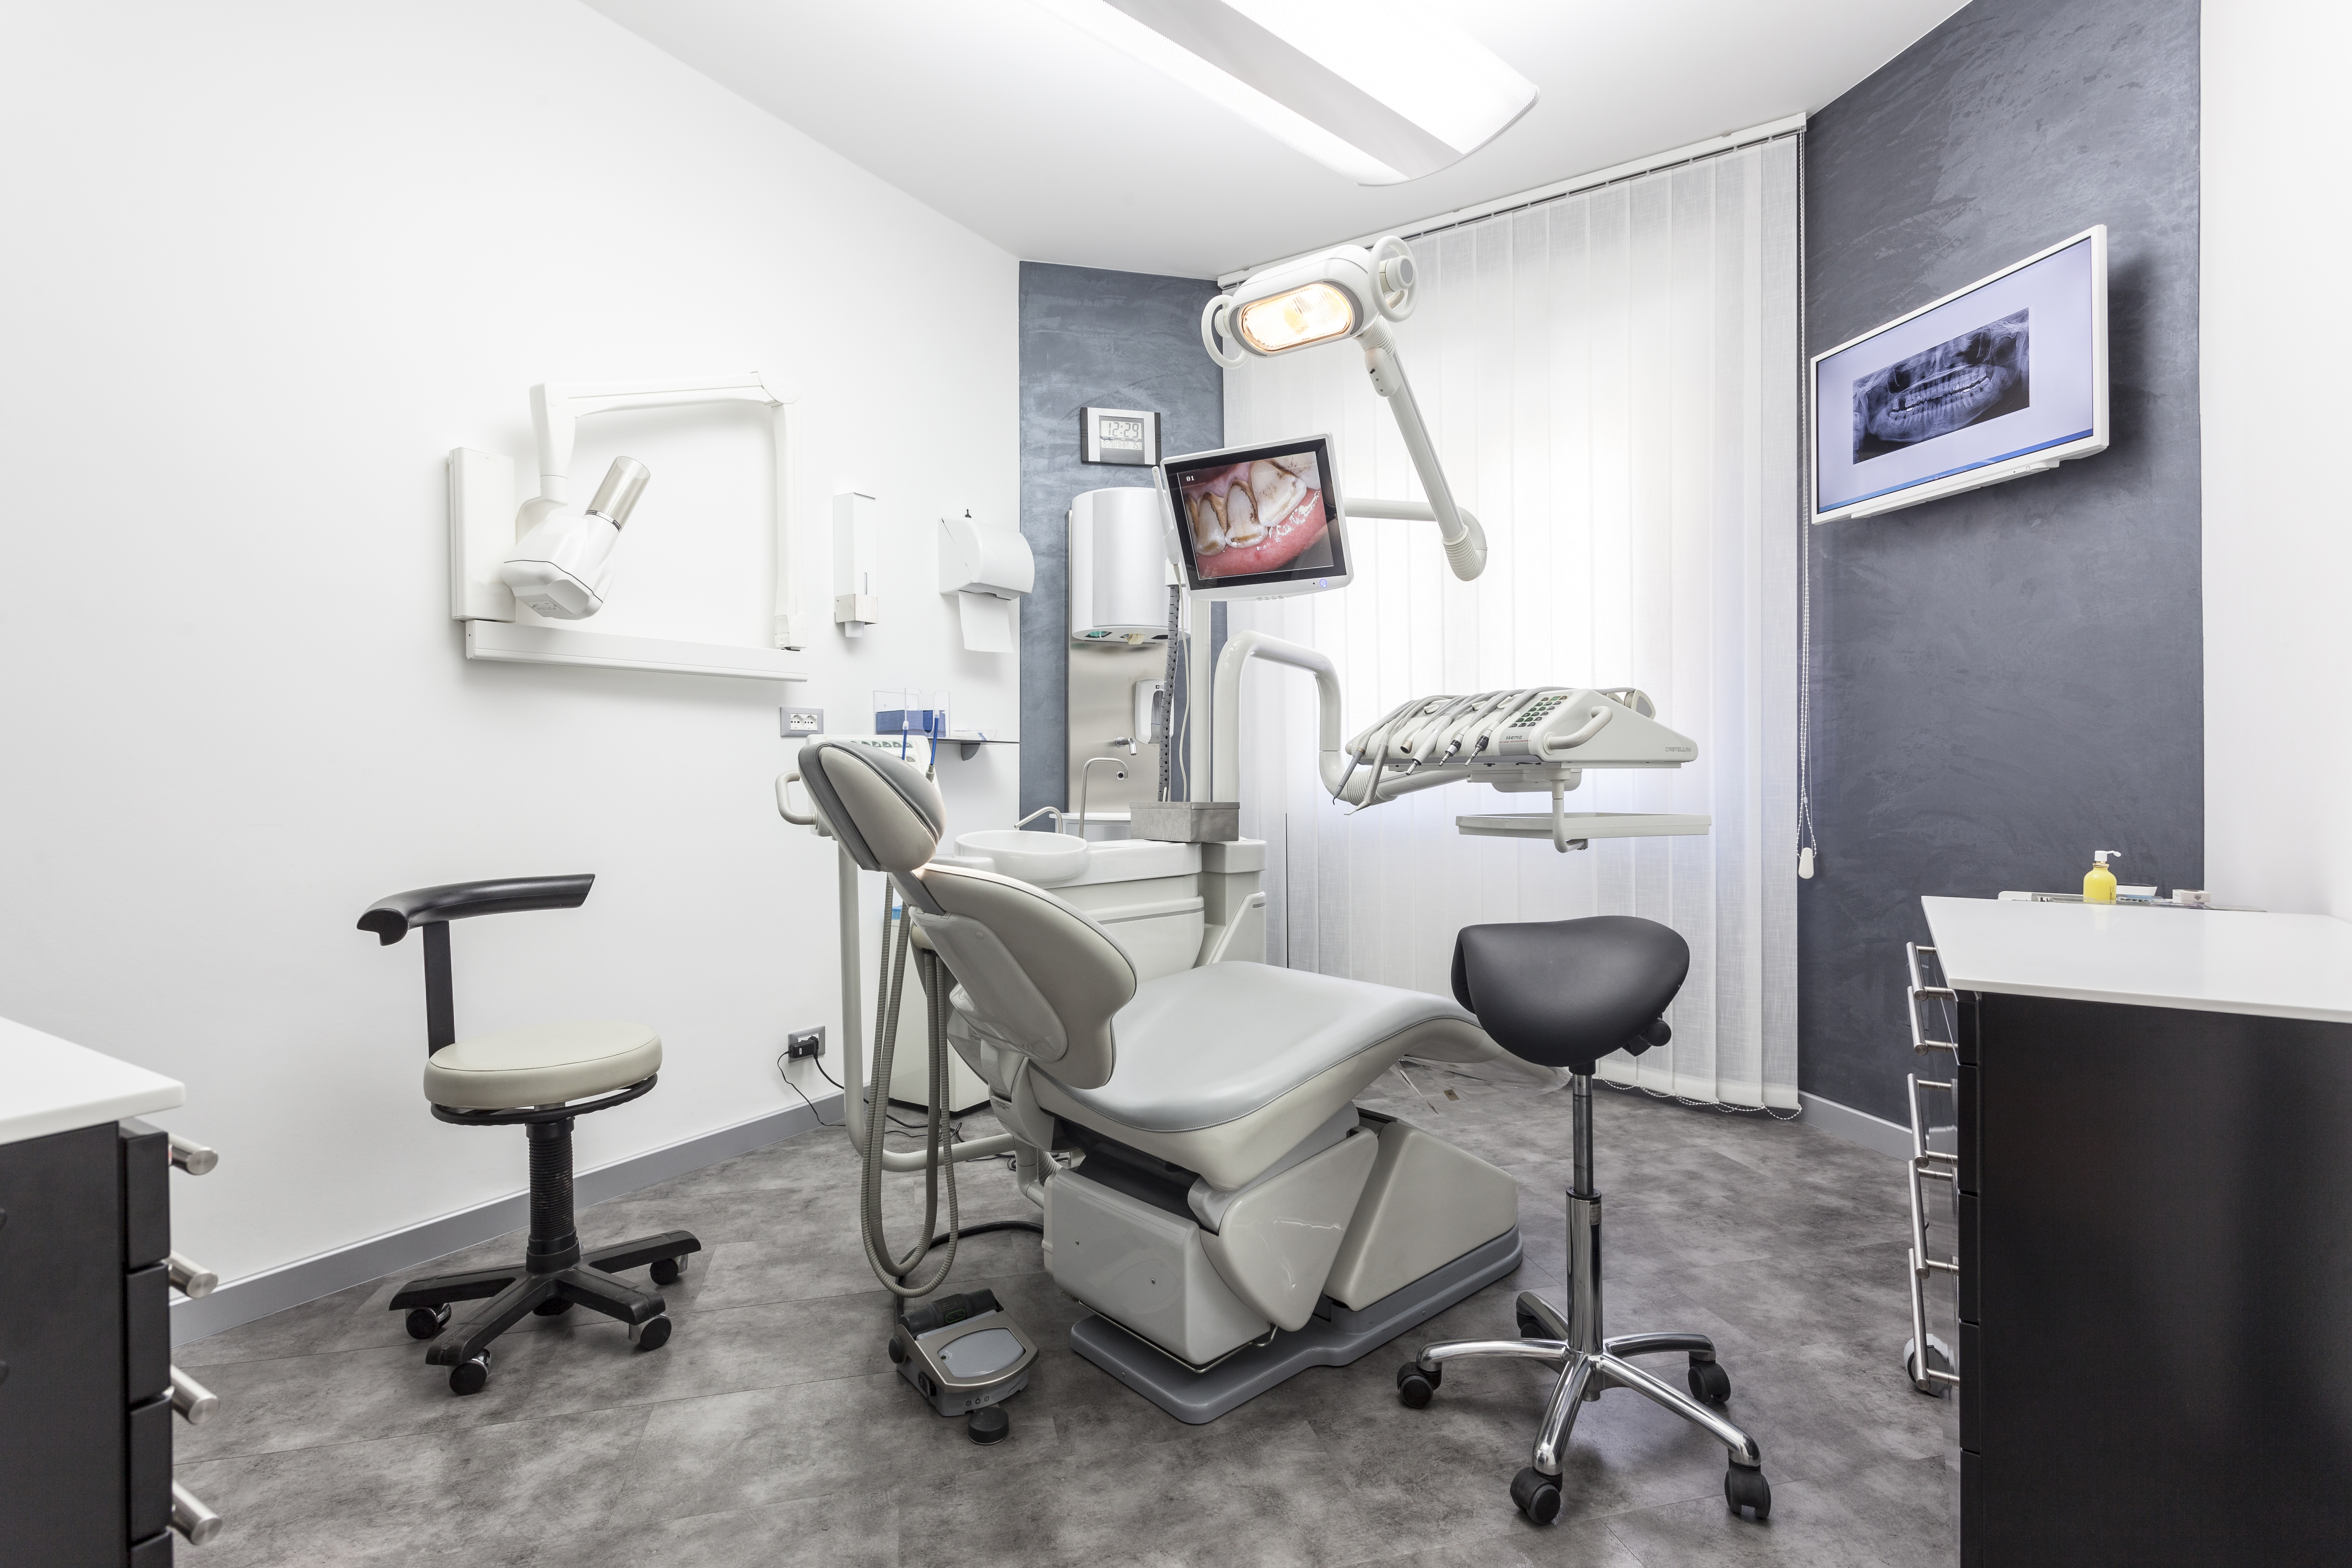 The Most Important Factor when Buying a Dental Practice